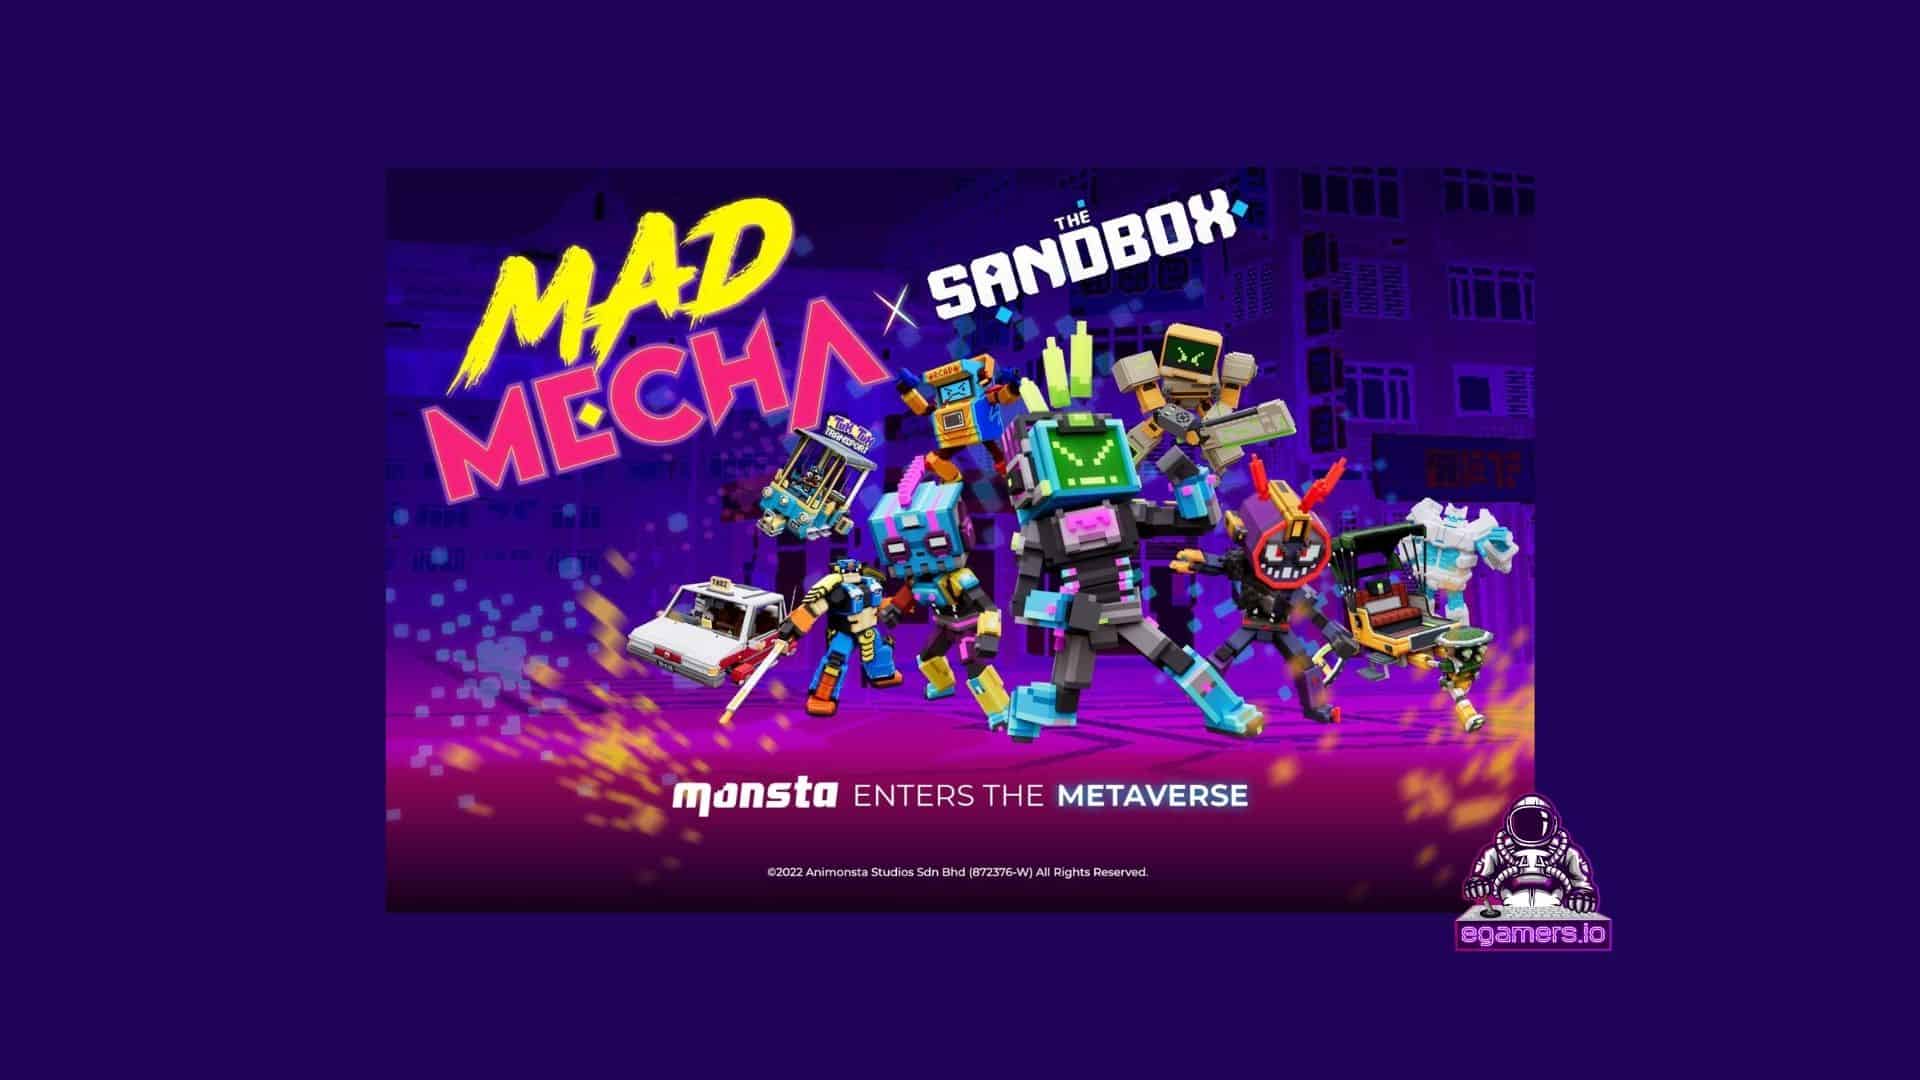 Another Exclusive Addition To The Sandbox With Monsta's 'Mad Mecha' Joining The Gaming Metaverse